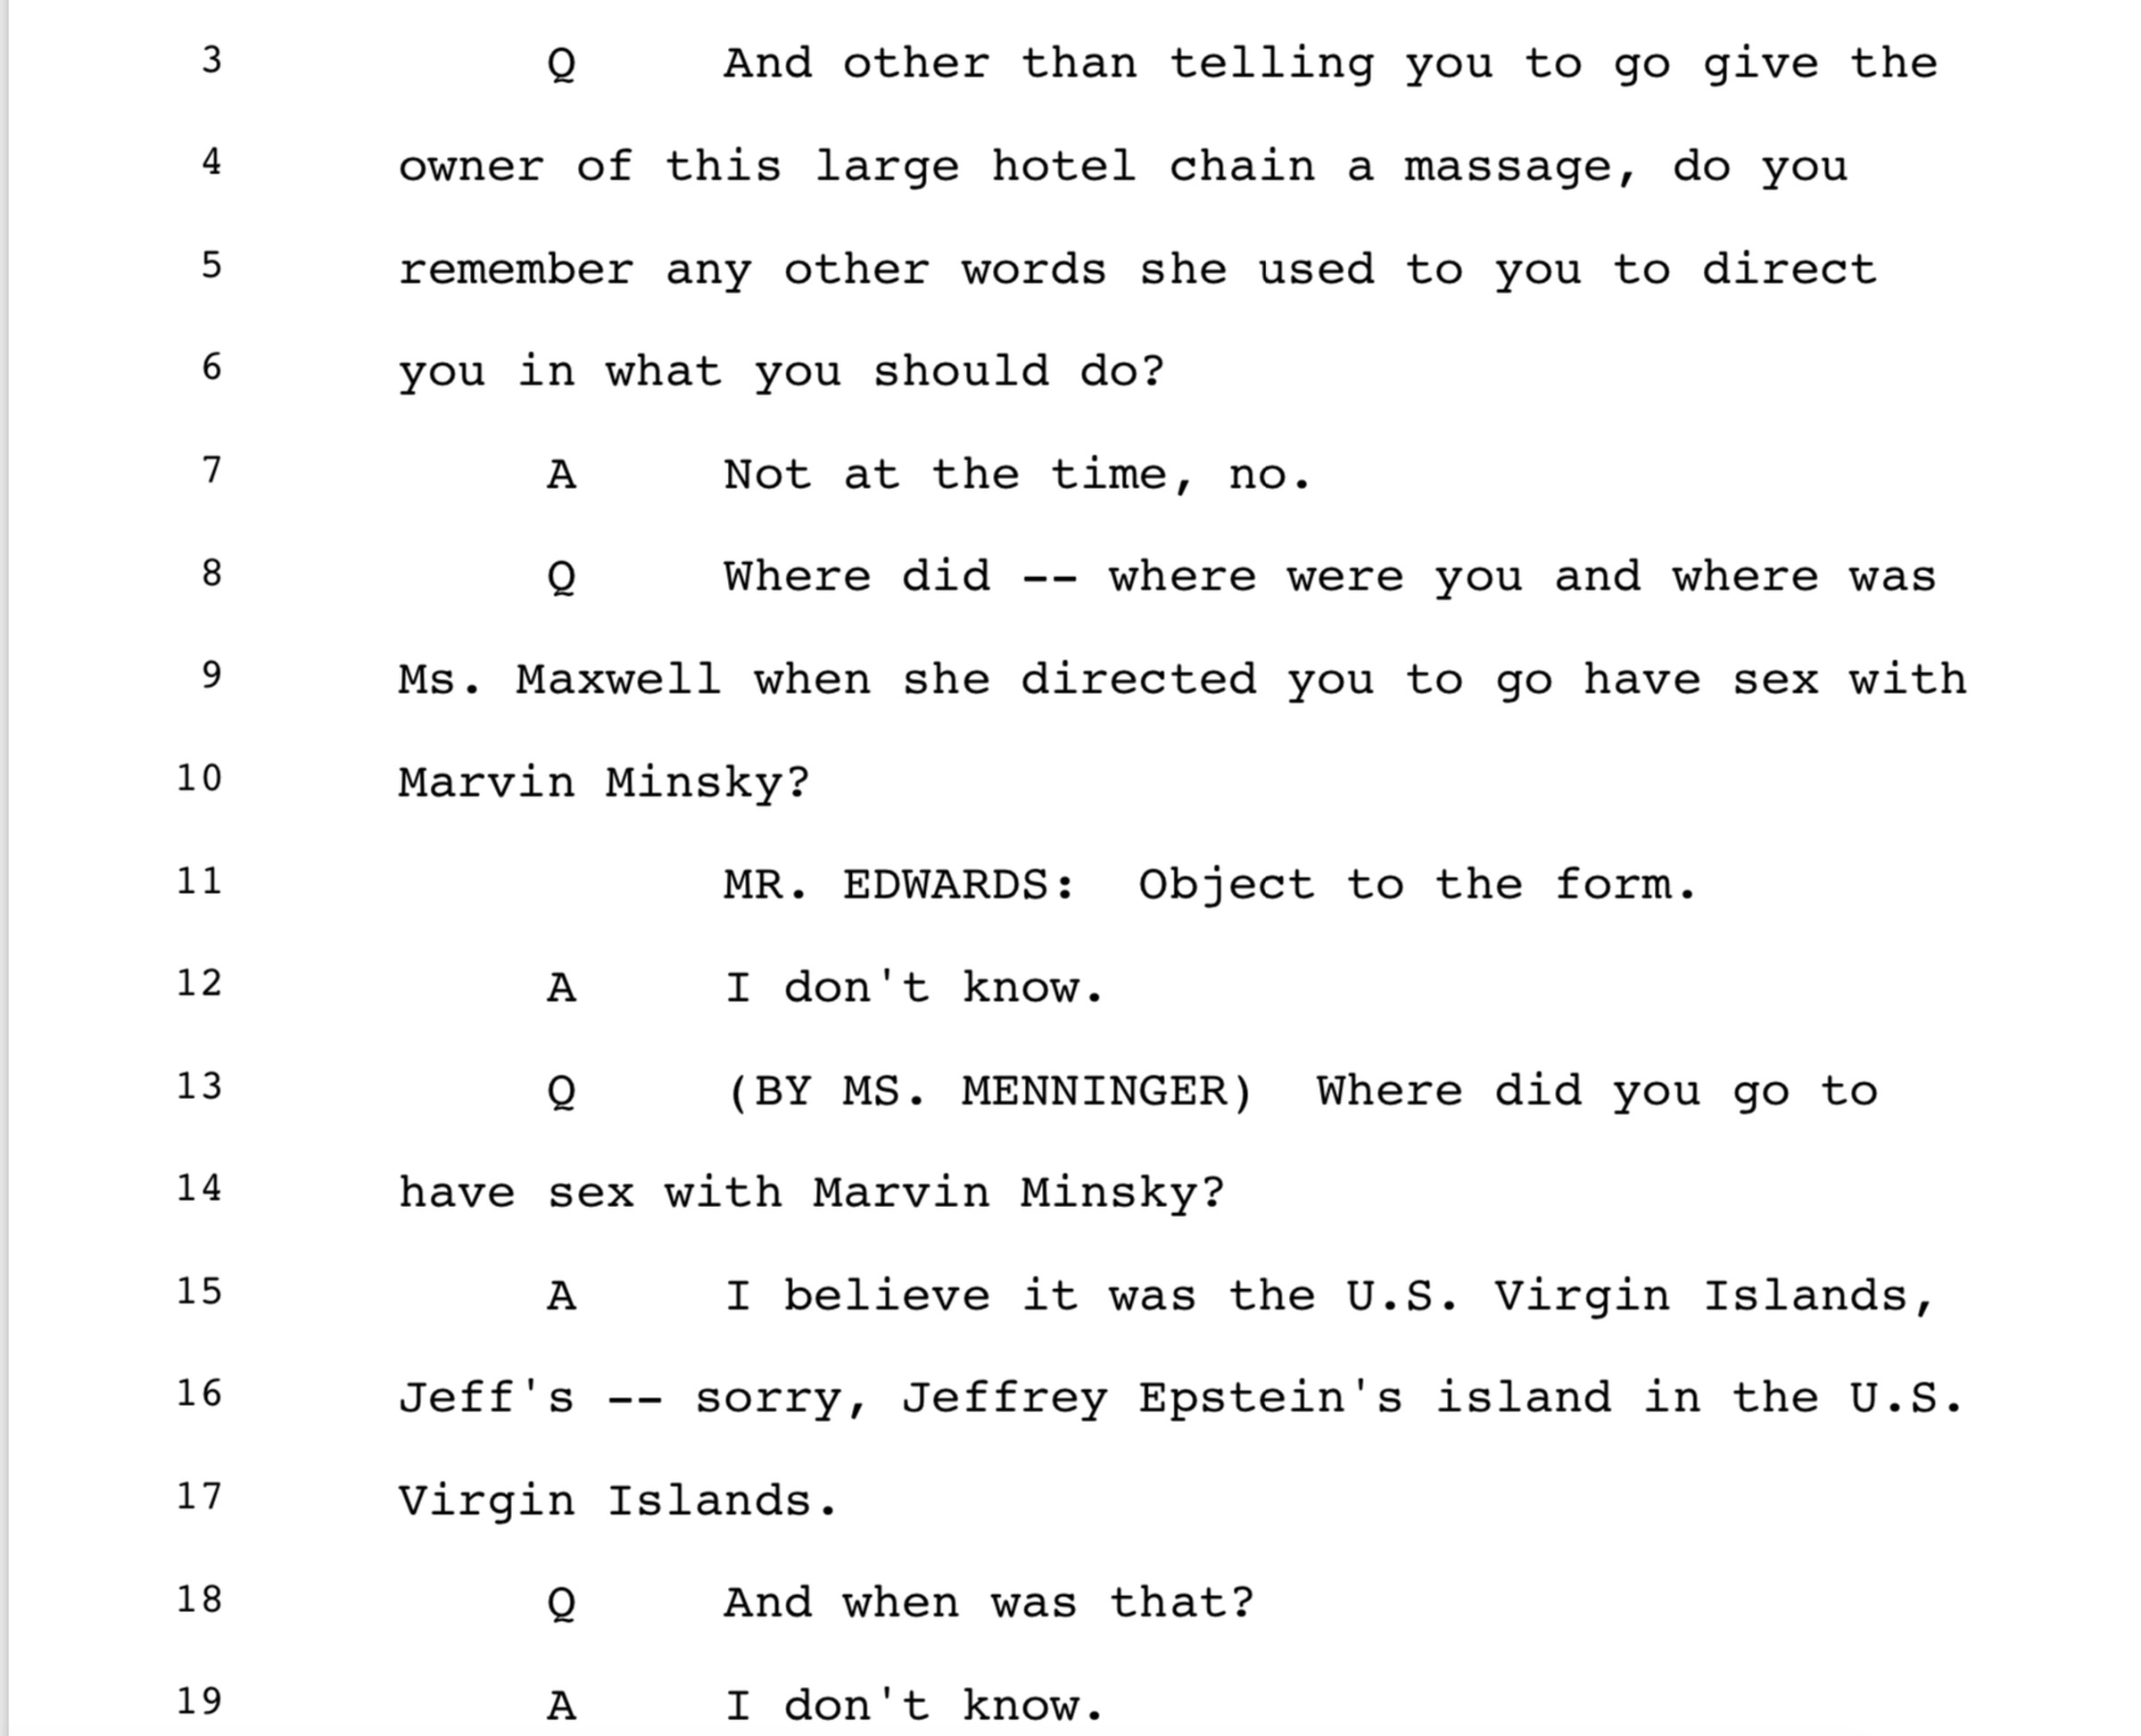 Deposition of Virginia Giuffre, taken on May 3, 2016